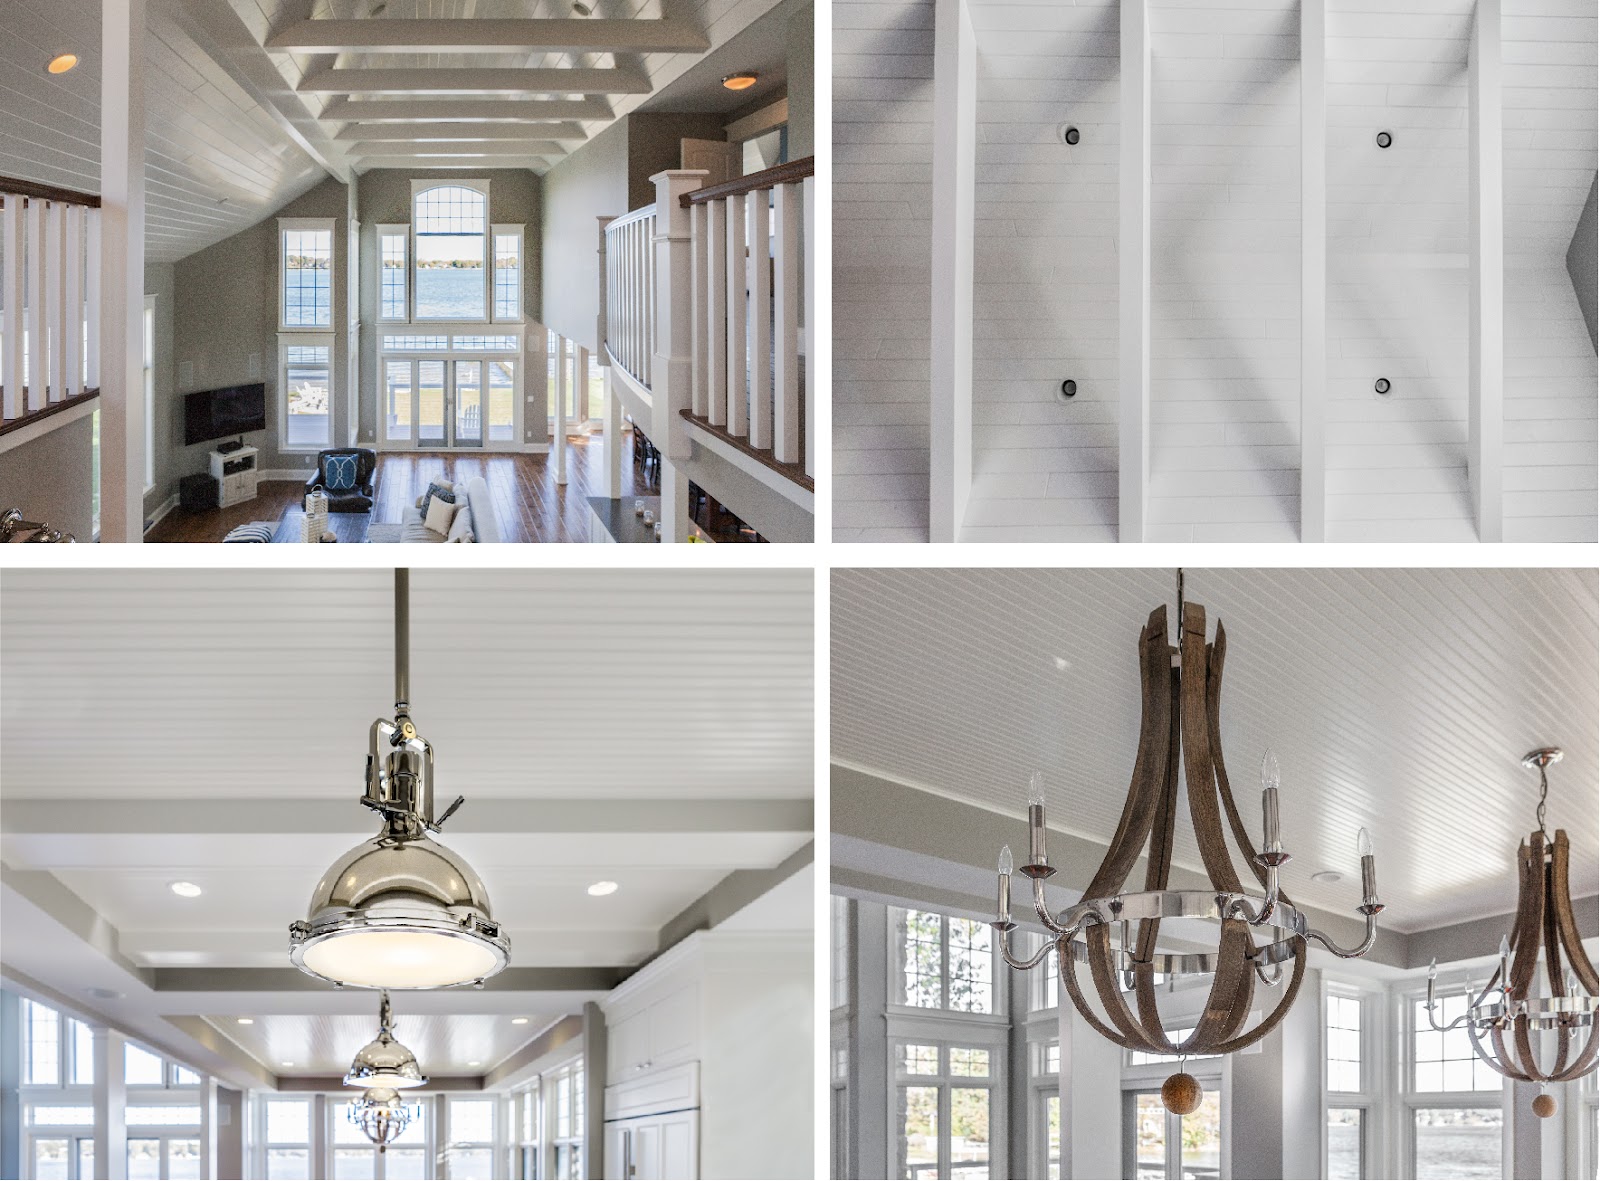 Board & batten, Shiplap, Cross Beam and Unique Lighting fixtures work to make these ceiling designs stand out despite their typical white color.